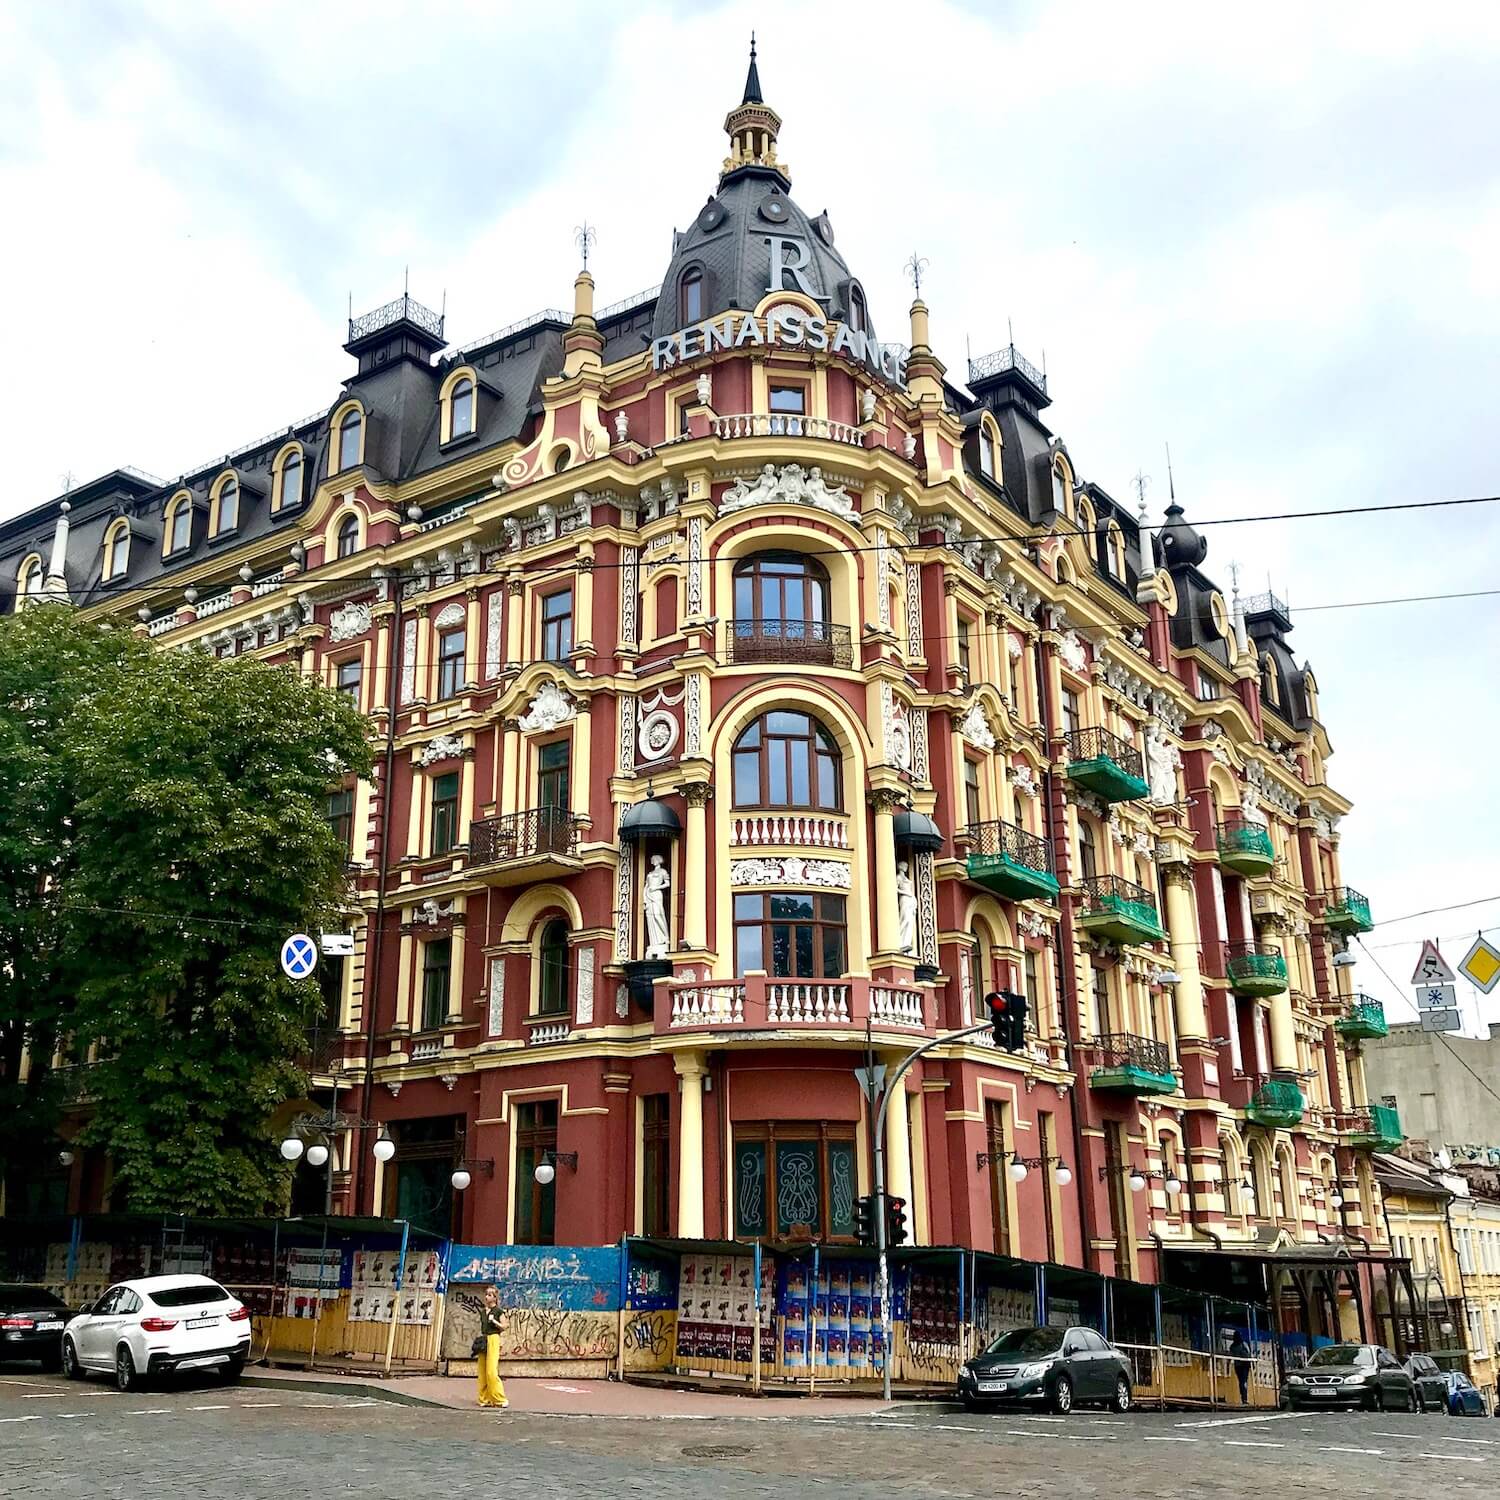 This 19th century grand budding is now a Renaissance Hotel. 